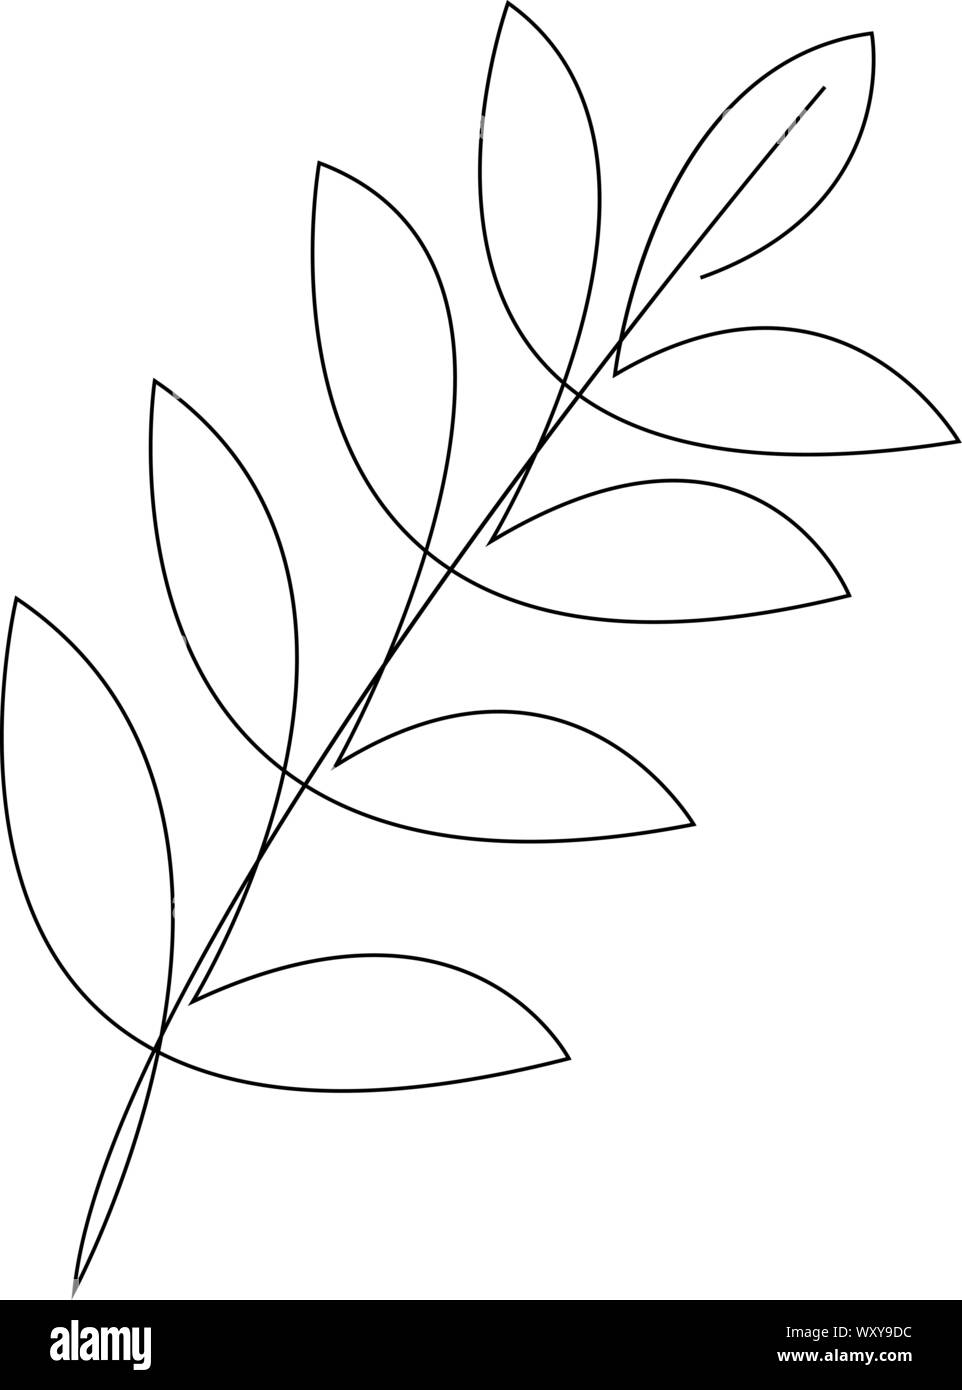 Autumn leaves one line drawing vector illustration Stock Vector